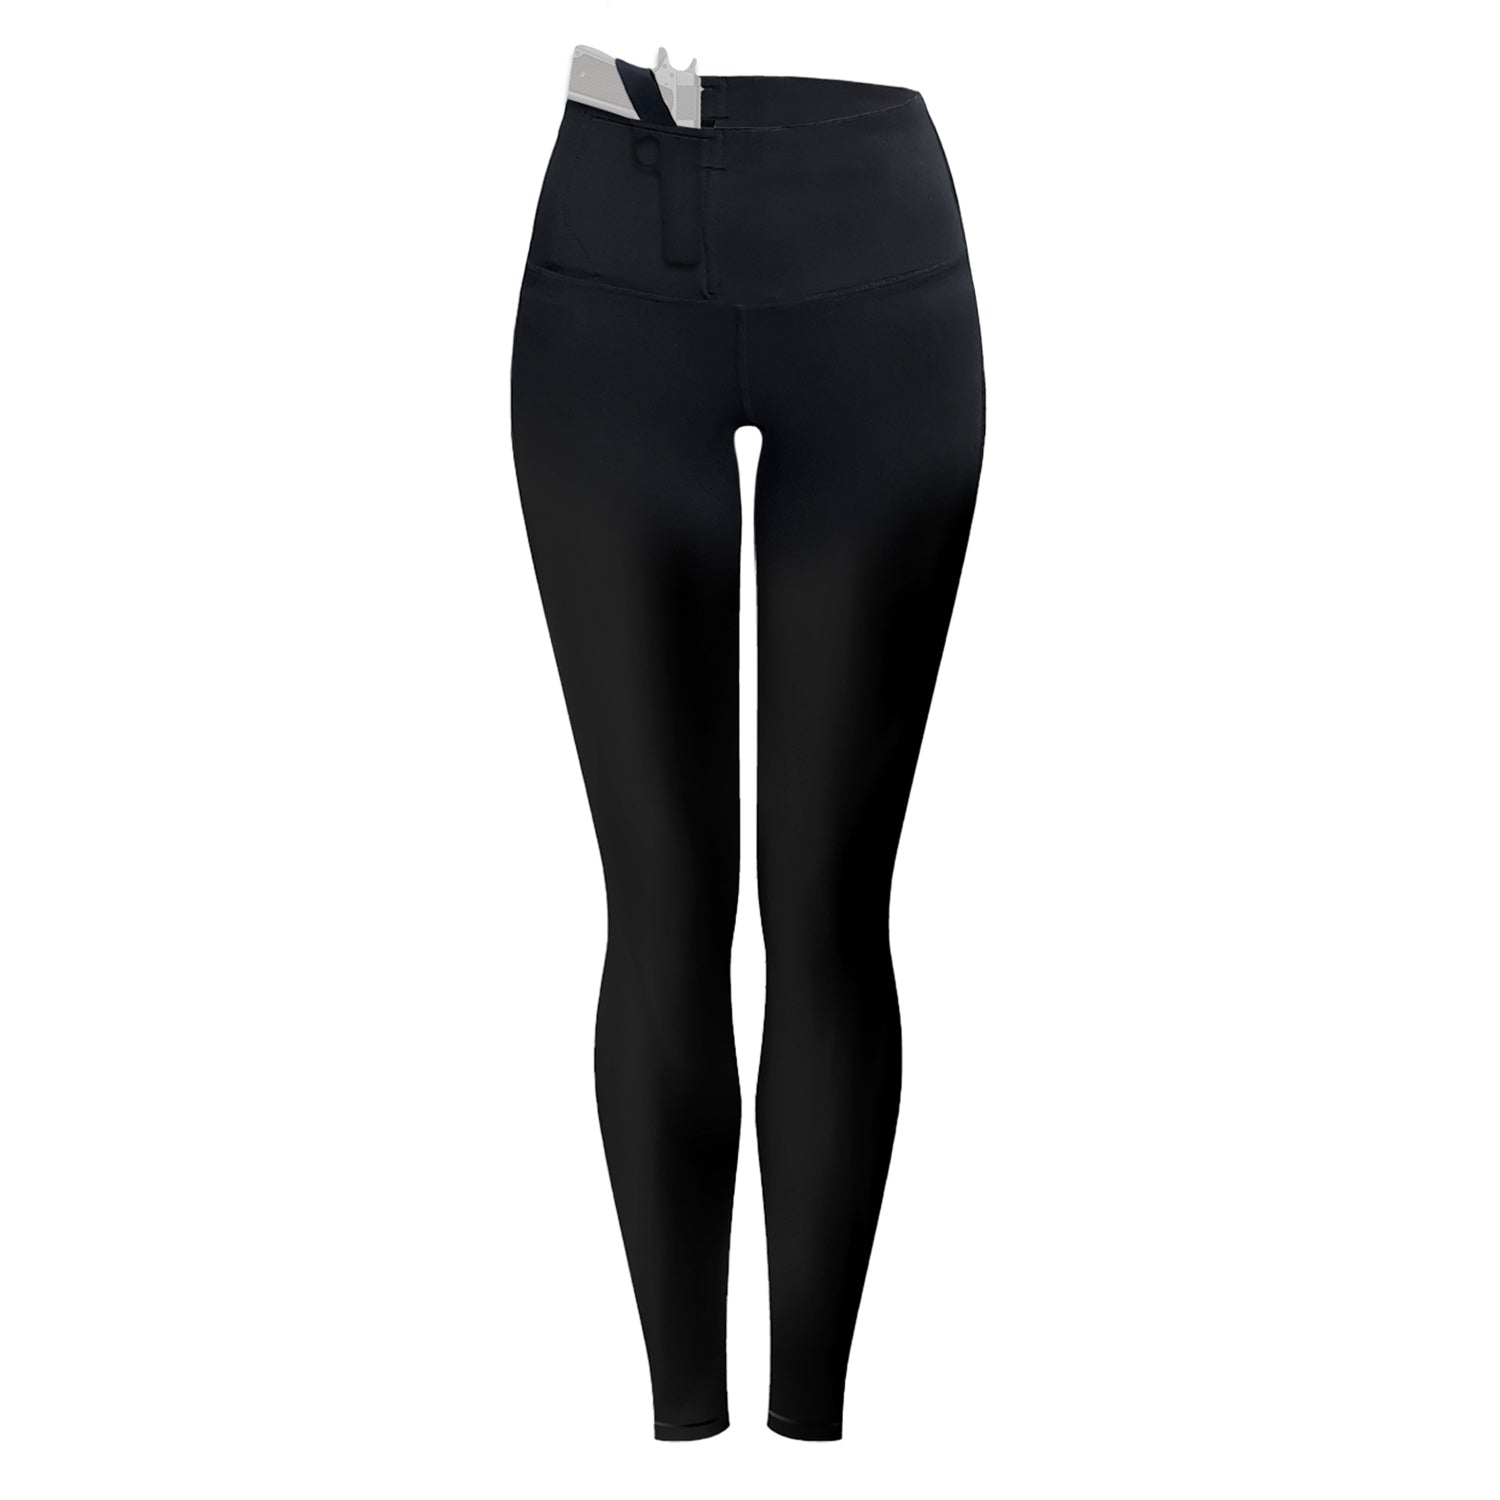 Women's Conceal Carry Full-length Leggings/Pants Just Above Ankle